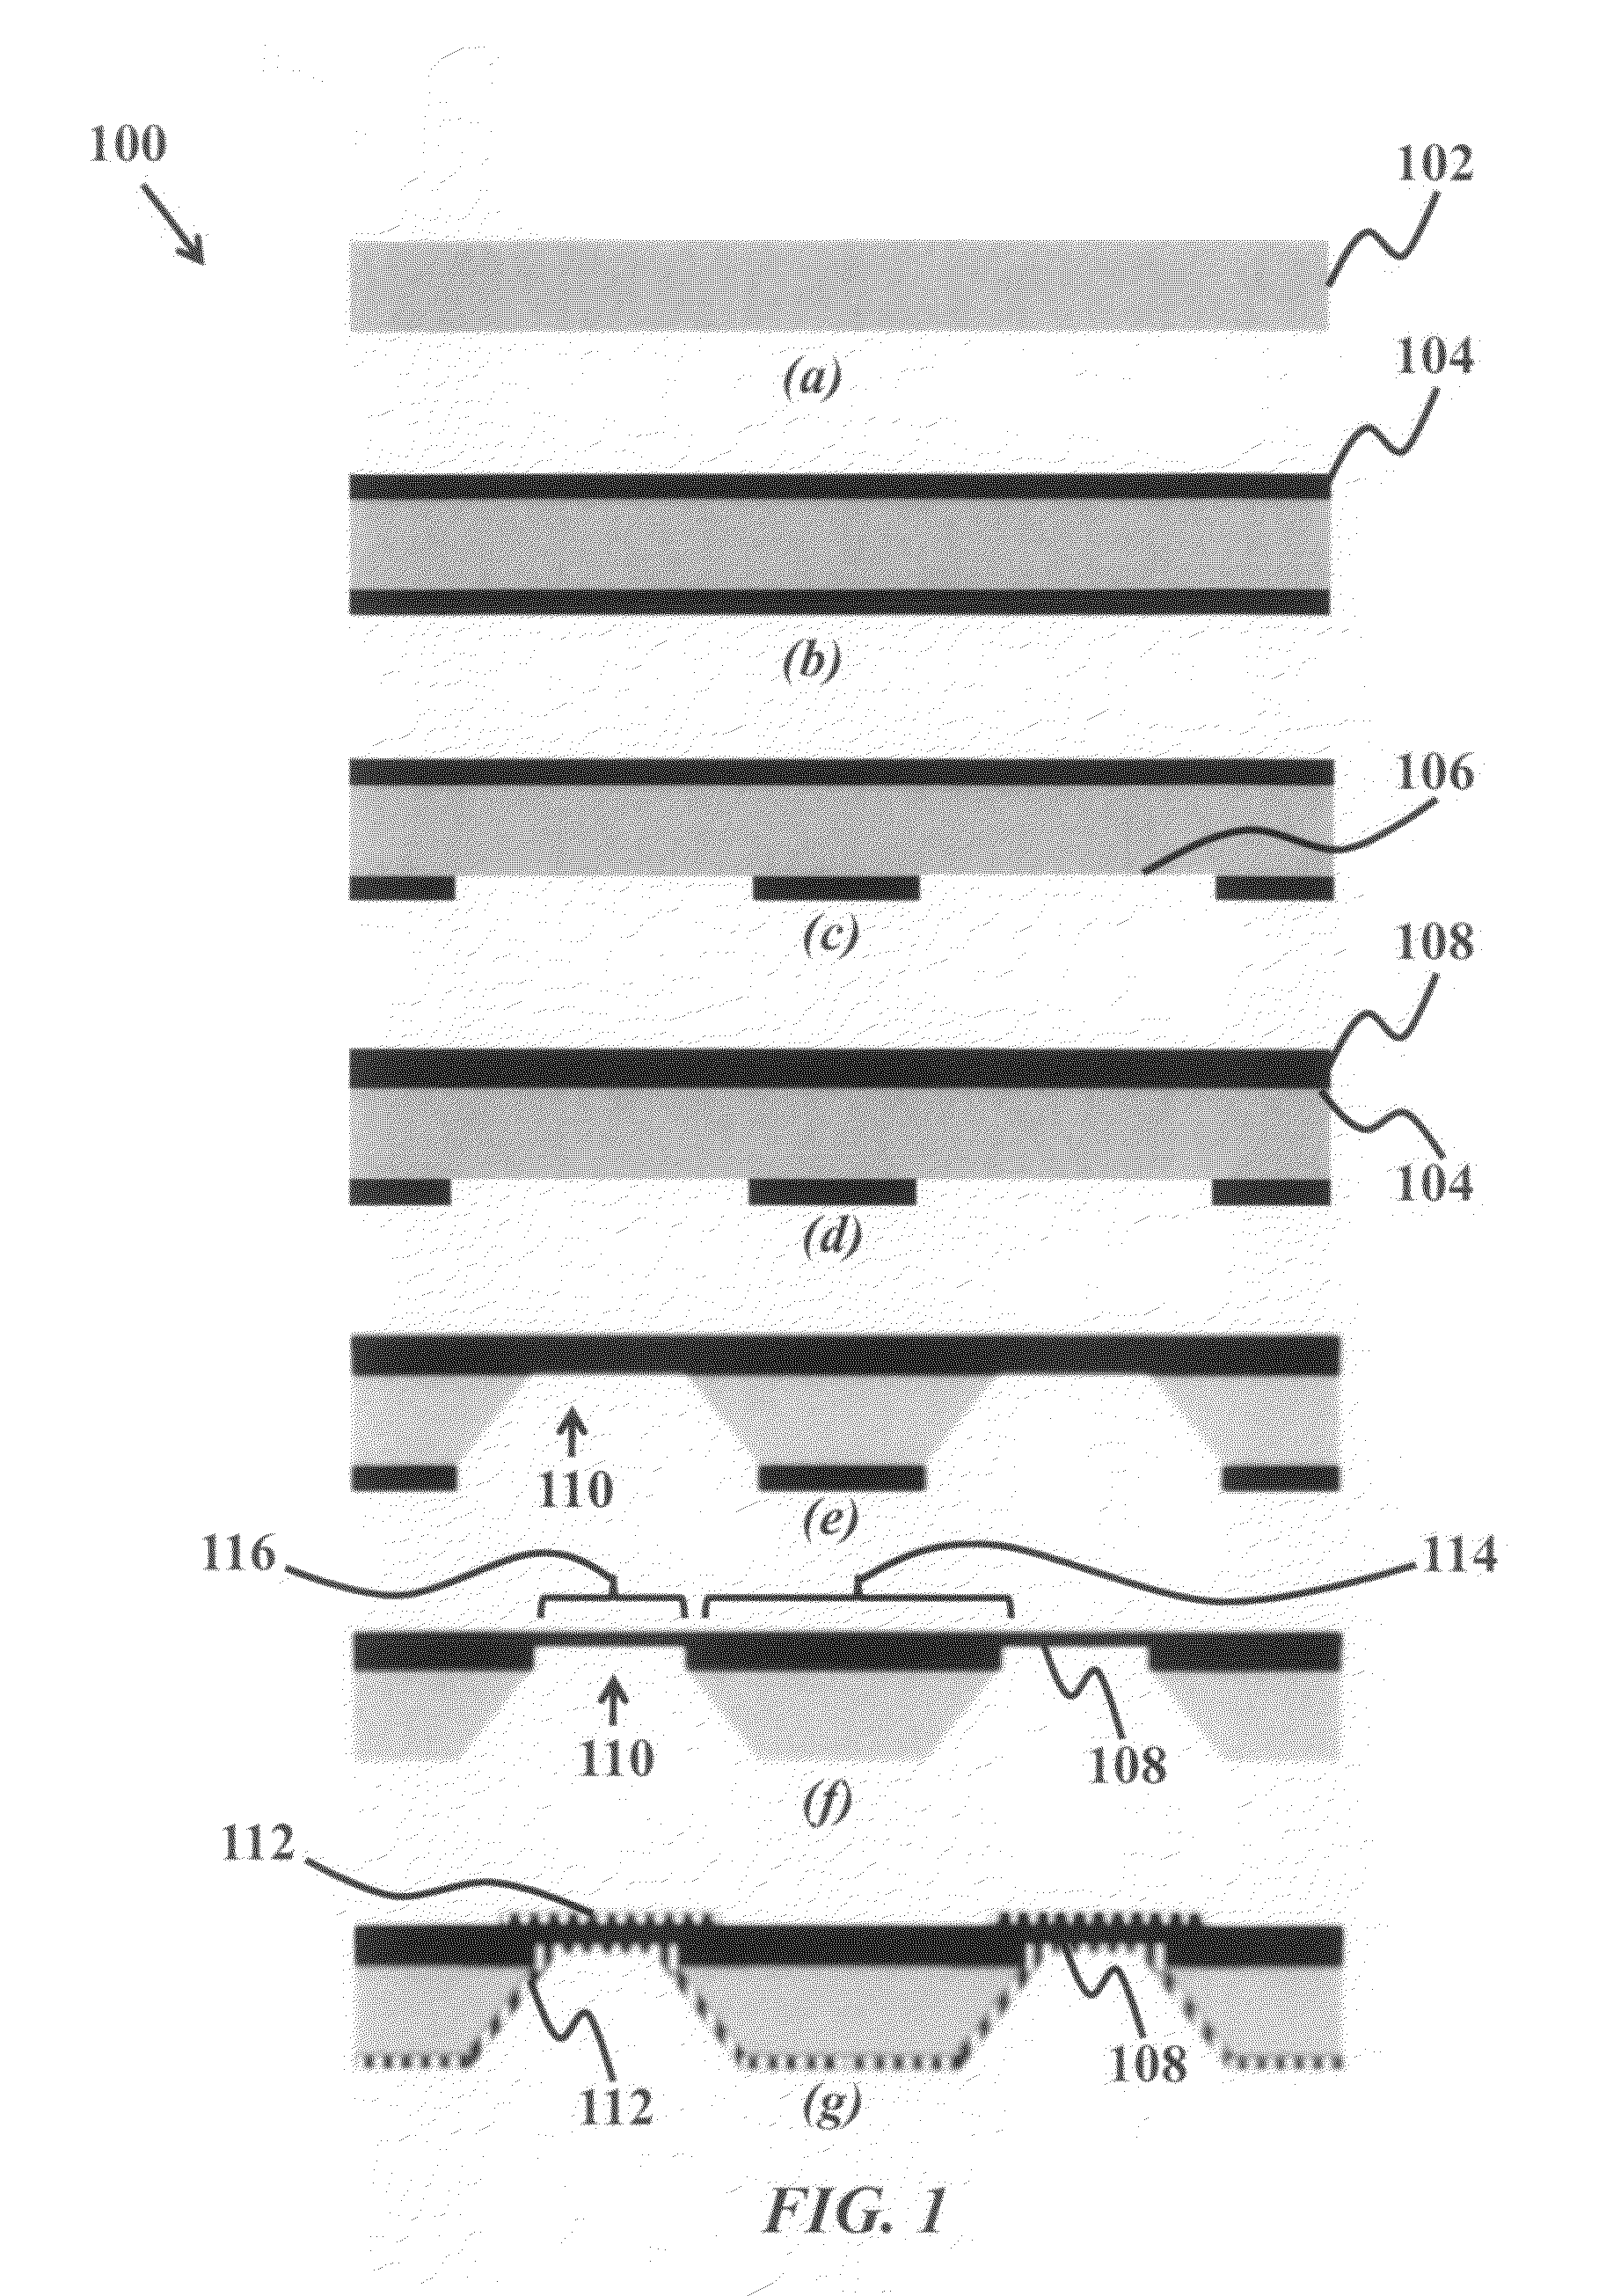 Fabrication method of thin film solid oxide fuel cells